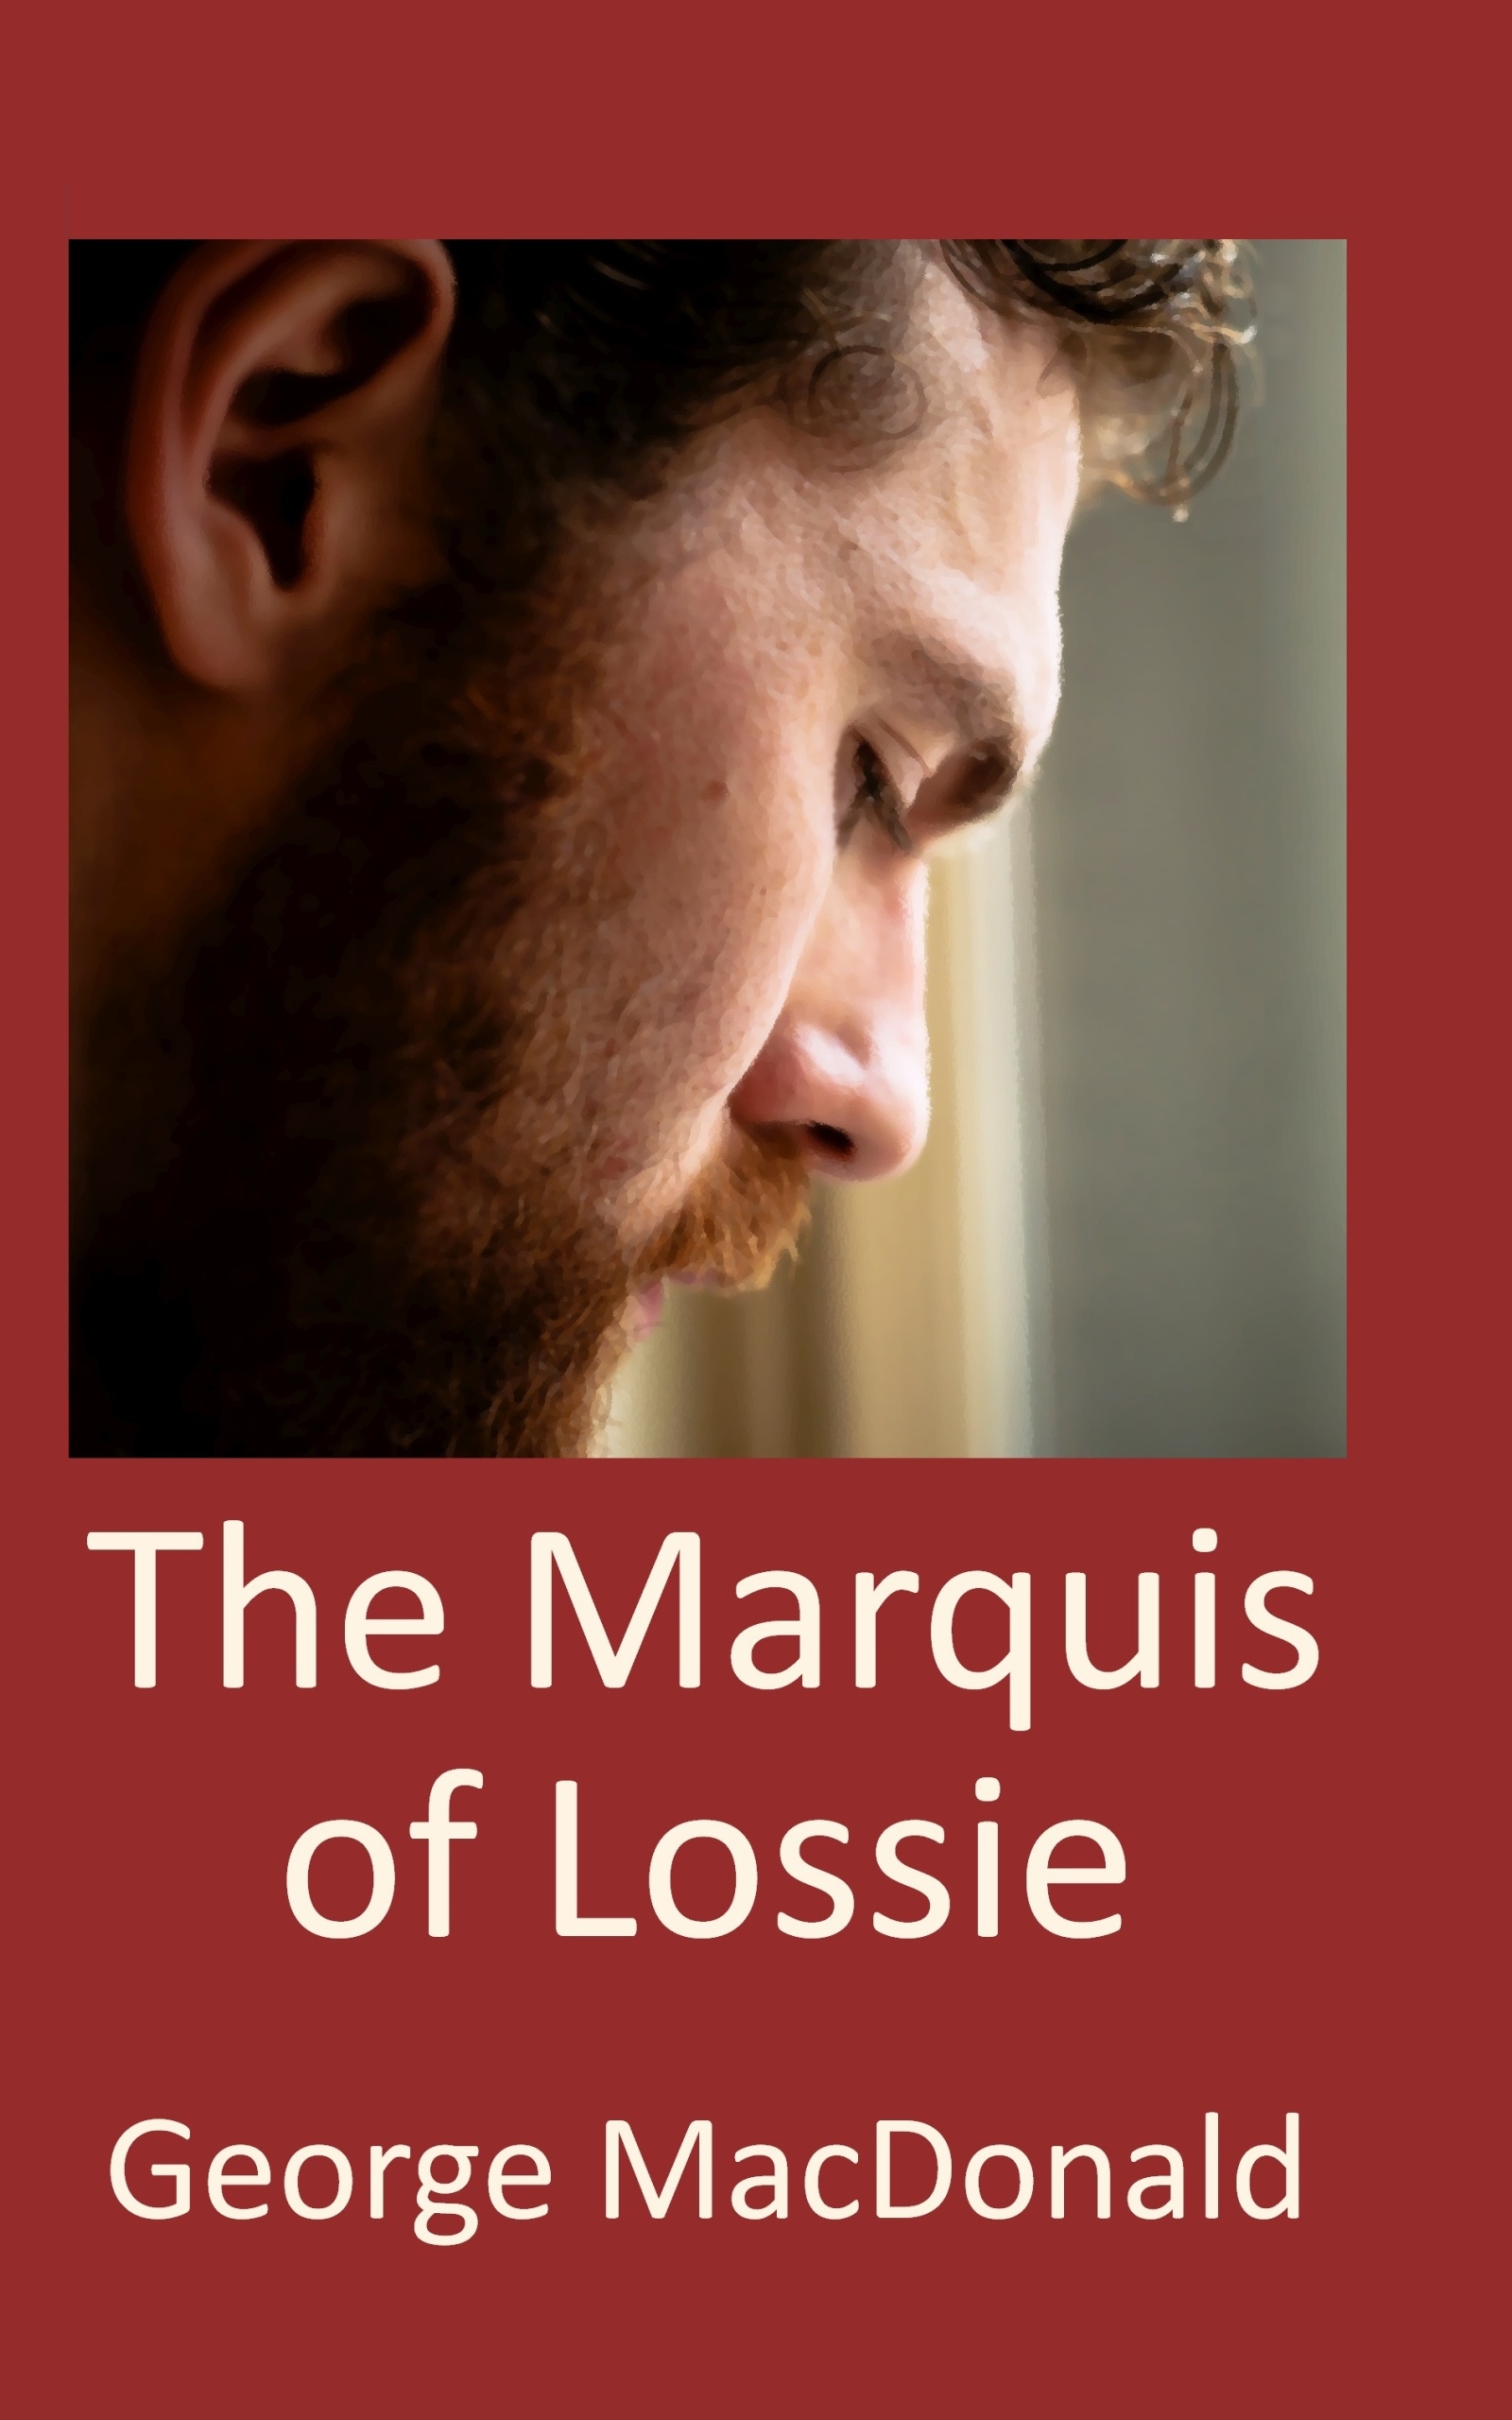 Book cover image for The Marquis of Lossie, by George MacDonald